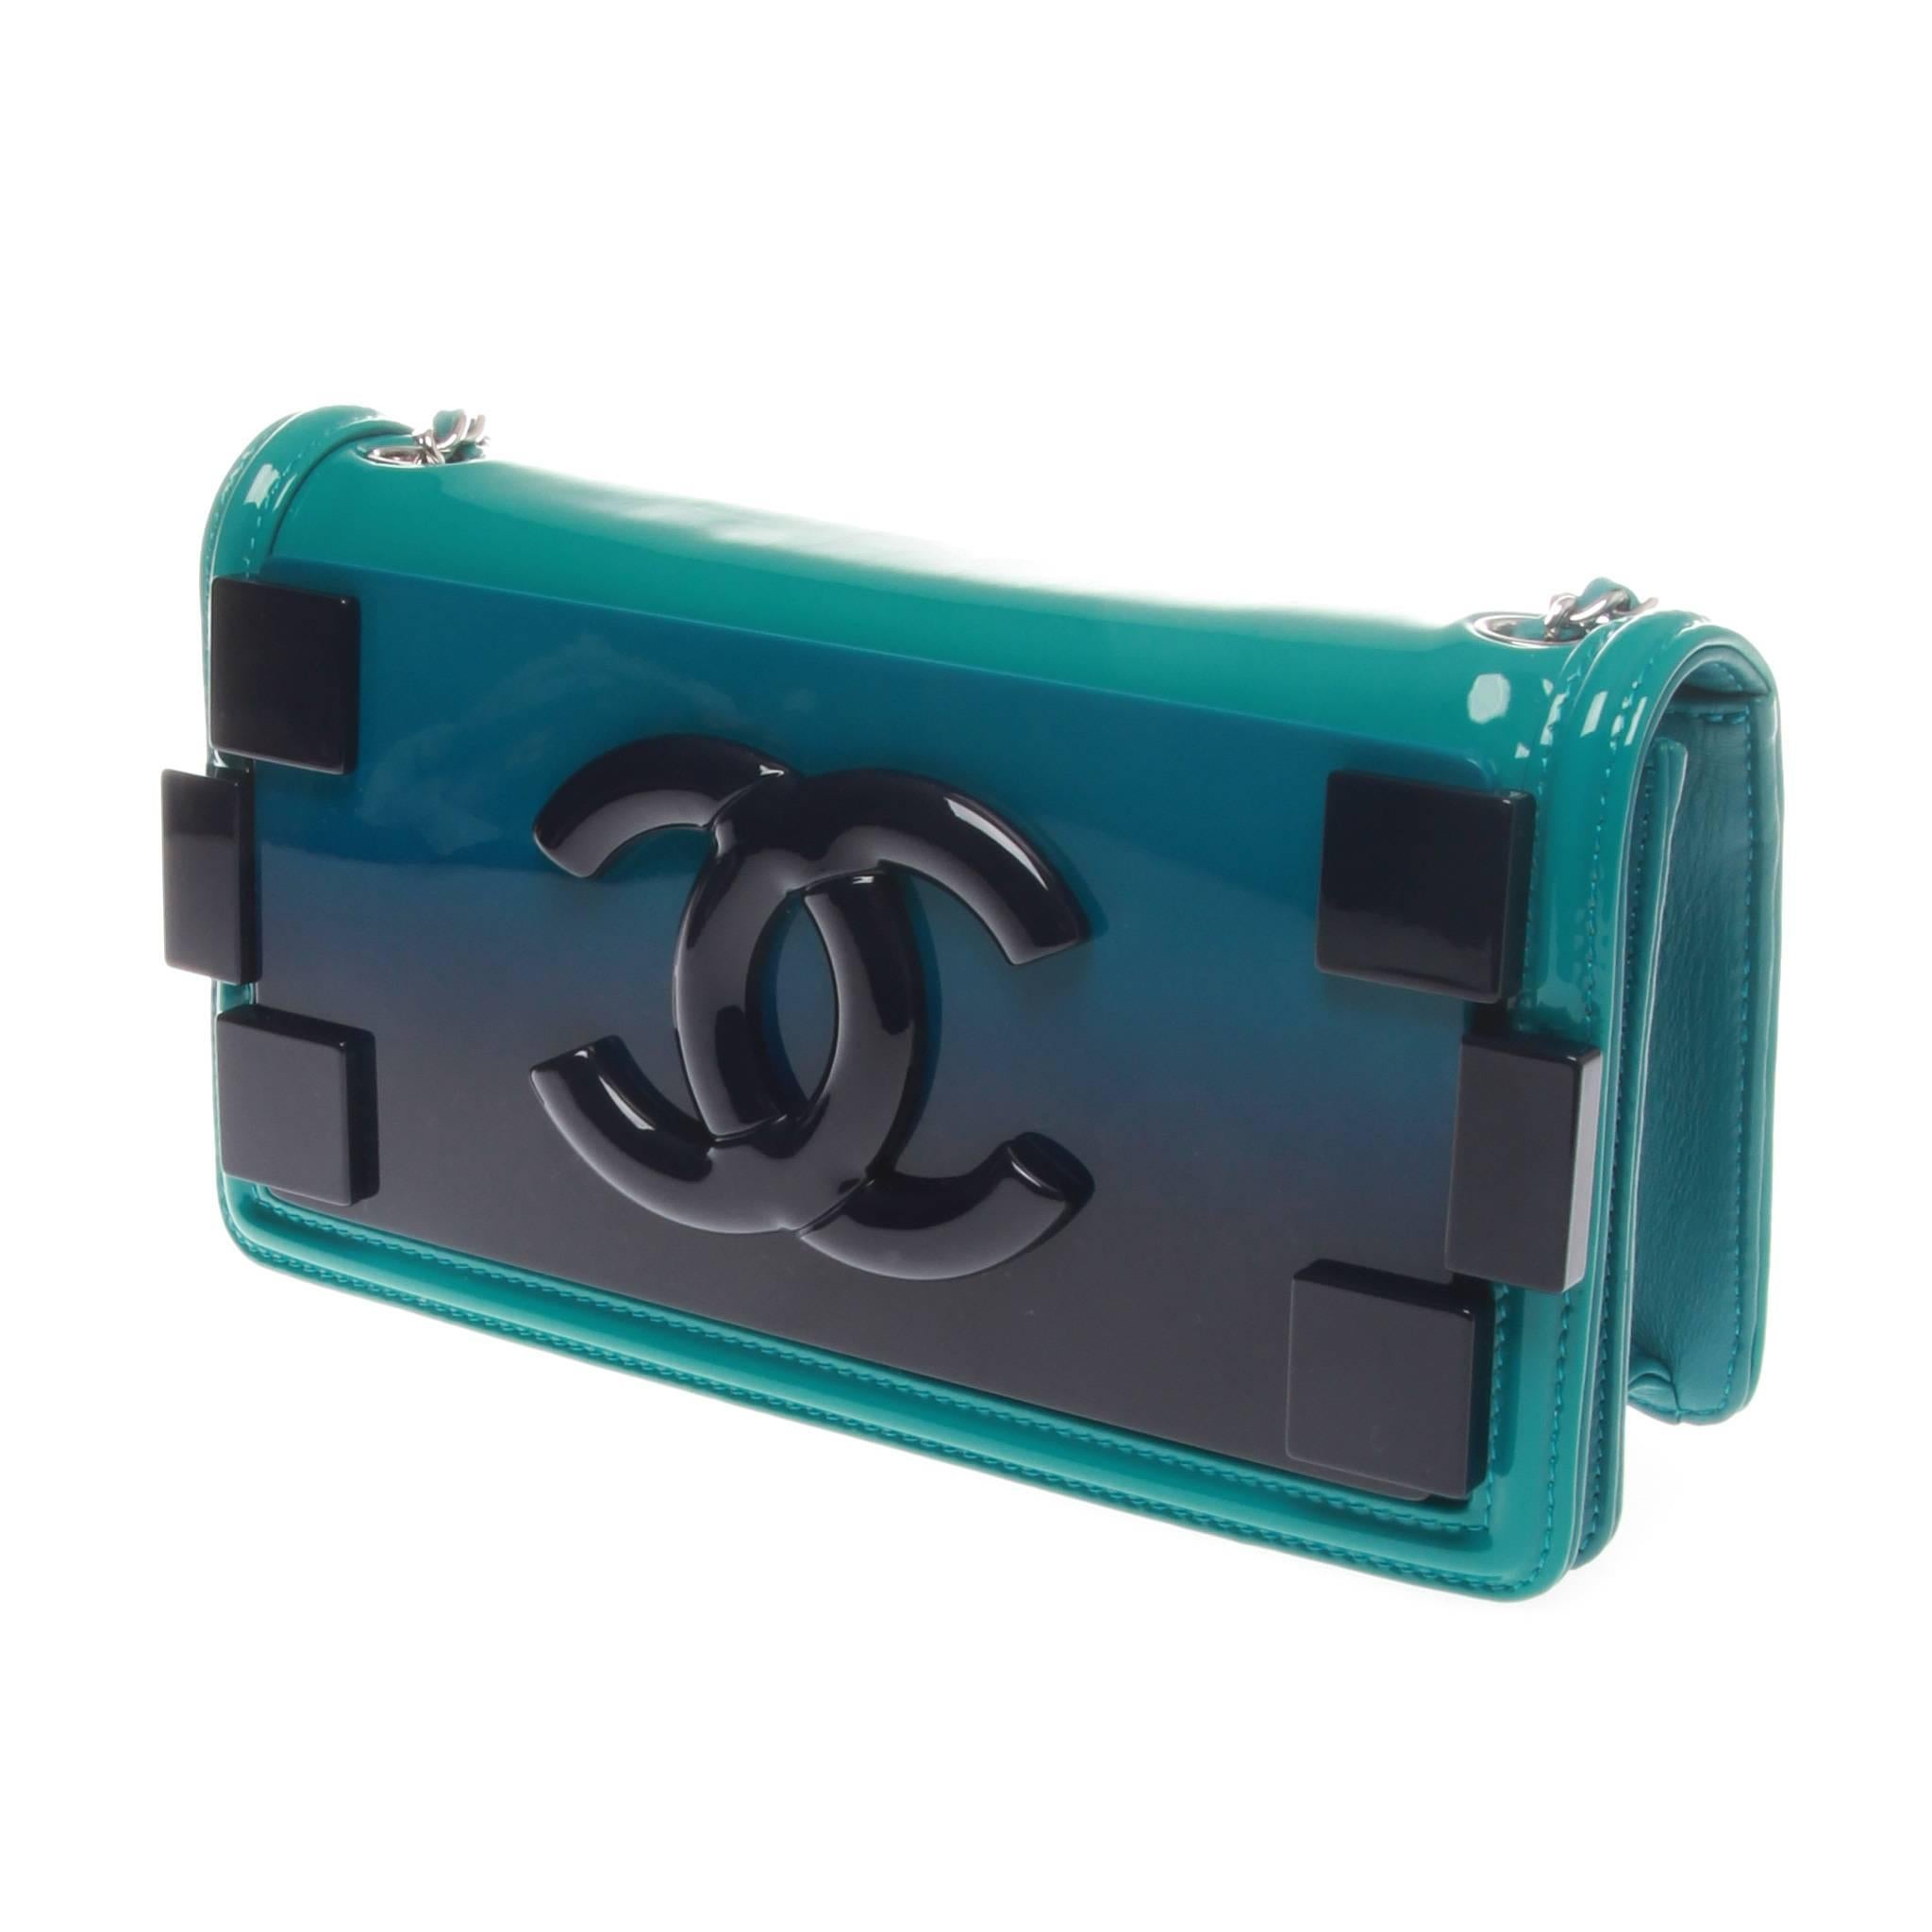 CHANEL Turquoise Iridescent Plexiglass Lego Boy Brick Flap Bag from the Spring/Summer 2014 Collection.

Teal quilted patent leather Chanel boy bag with silver-tone hardware, single shoulder strap with chain-link and leather accents, blue ombré resin